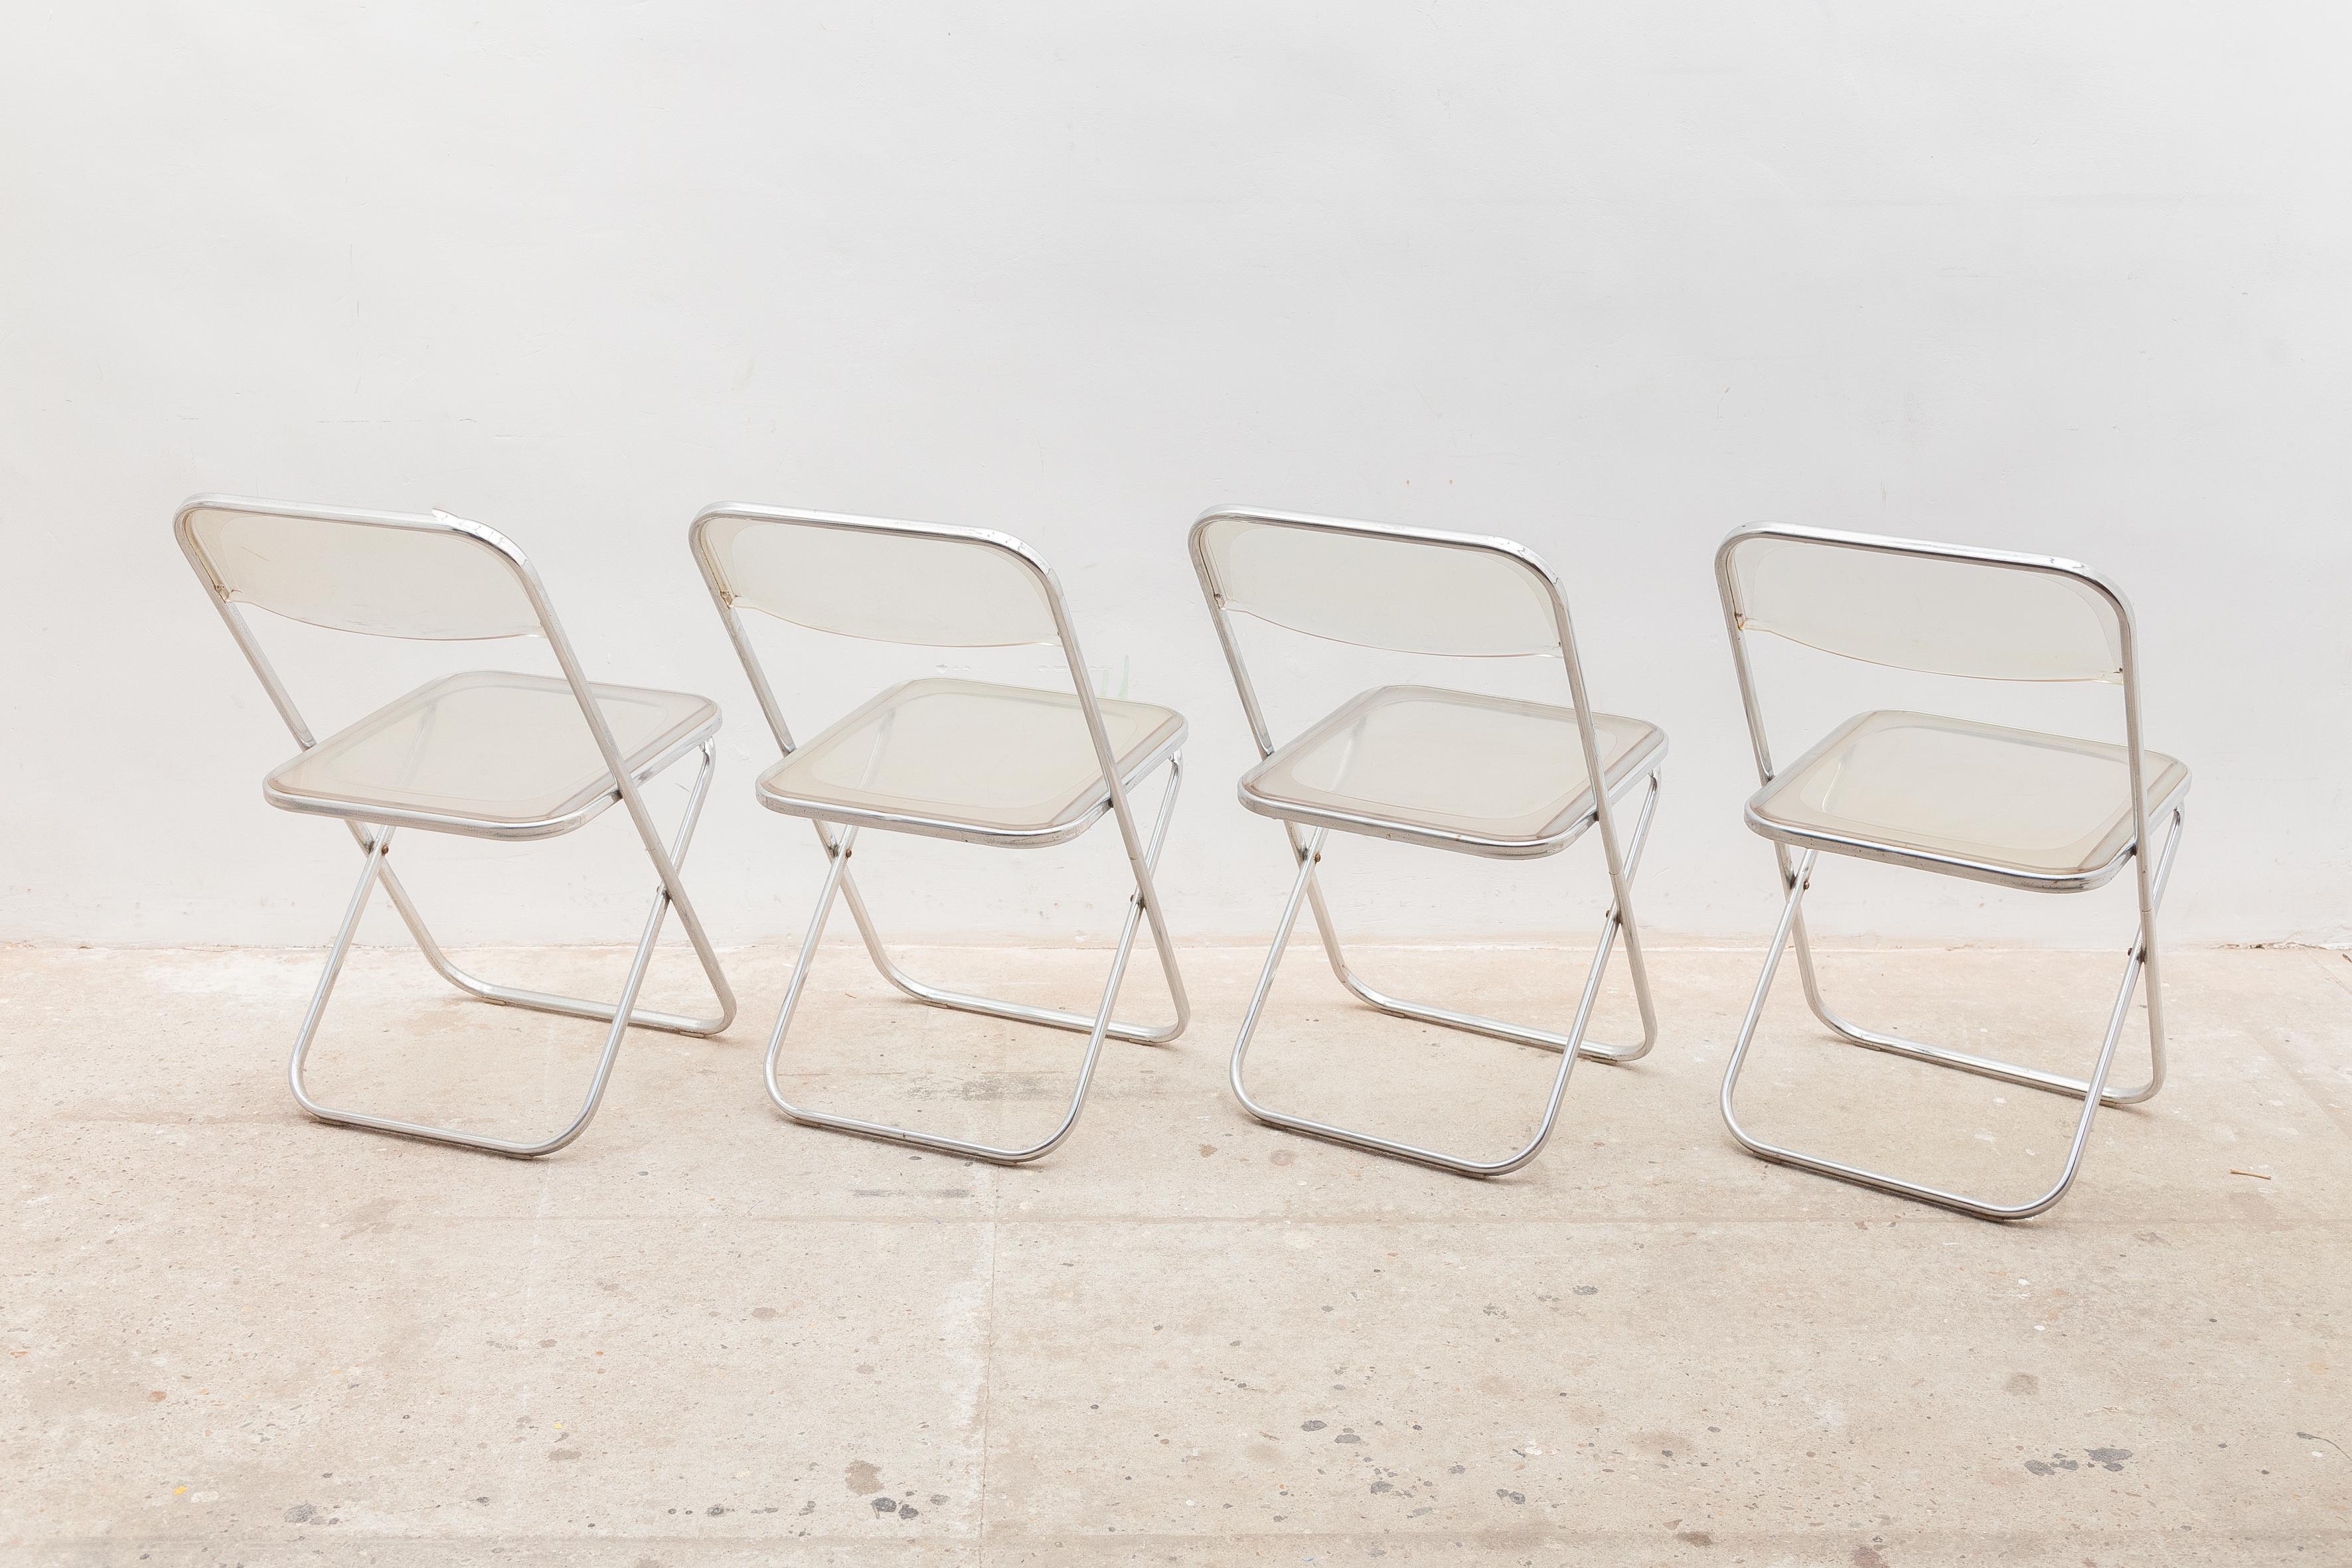 Mid-Century Modern Set of Four Lucite in th style of Giancarlo Piretti's Plia chairs, circa 1970's